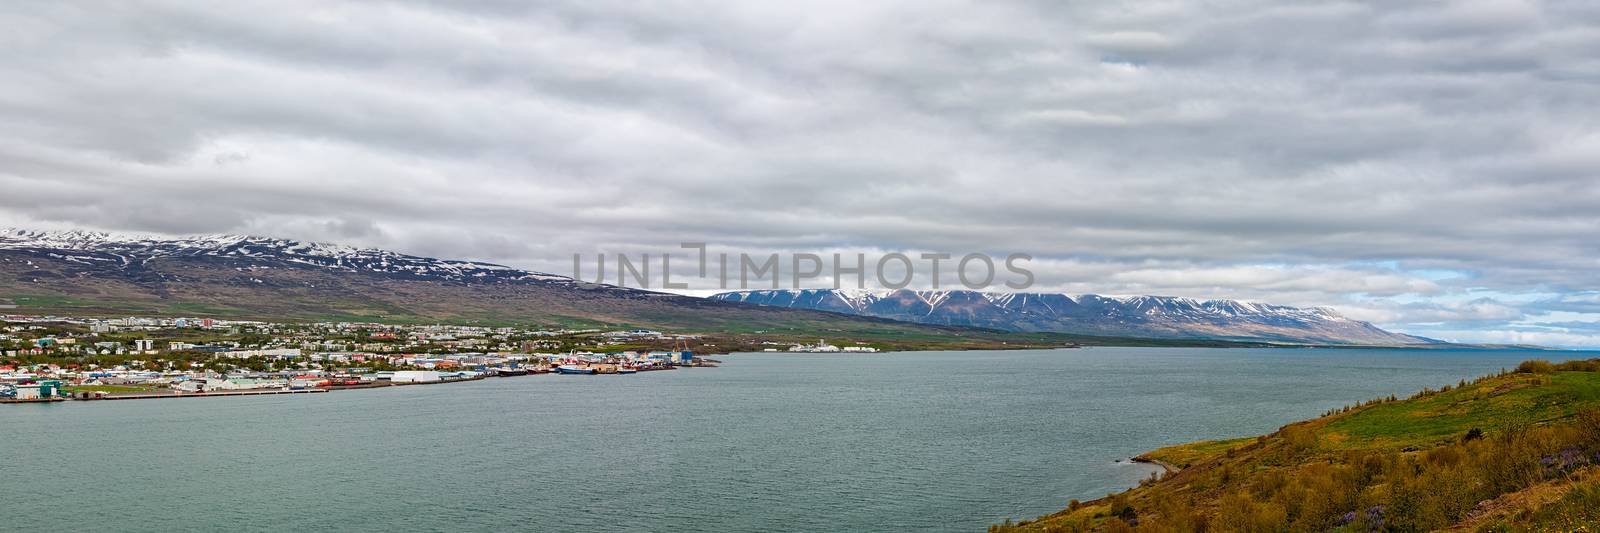 Panoramic view of Akureyri and mountains on background under a cloudy sky, Iceland